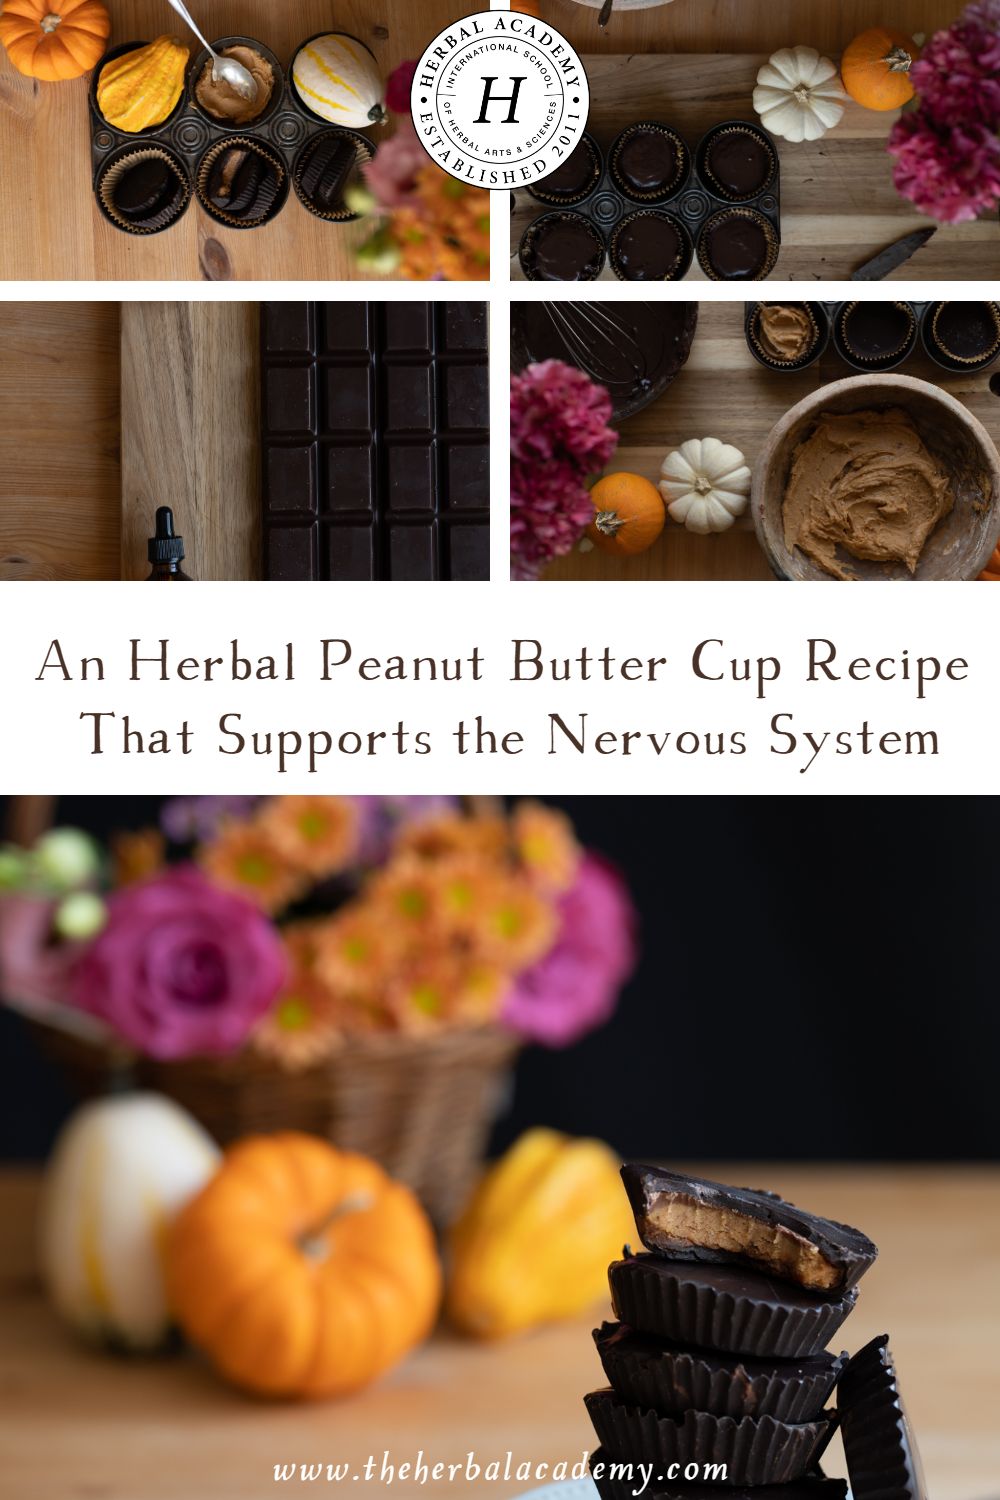 An Herbal Peanut Butter Cup Recipe That Supports the Nervous System | Herbal Academy | Feel inspired by this Herbal Peanut Butter Cup recipe to start incorporating herbal allies into your favorite foods and sweet treats.